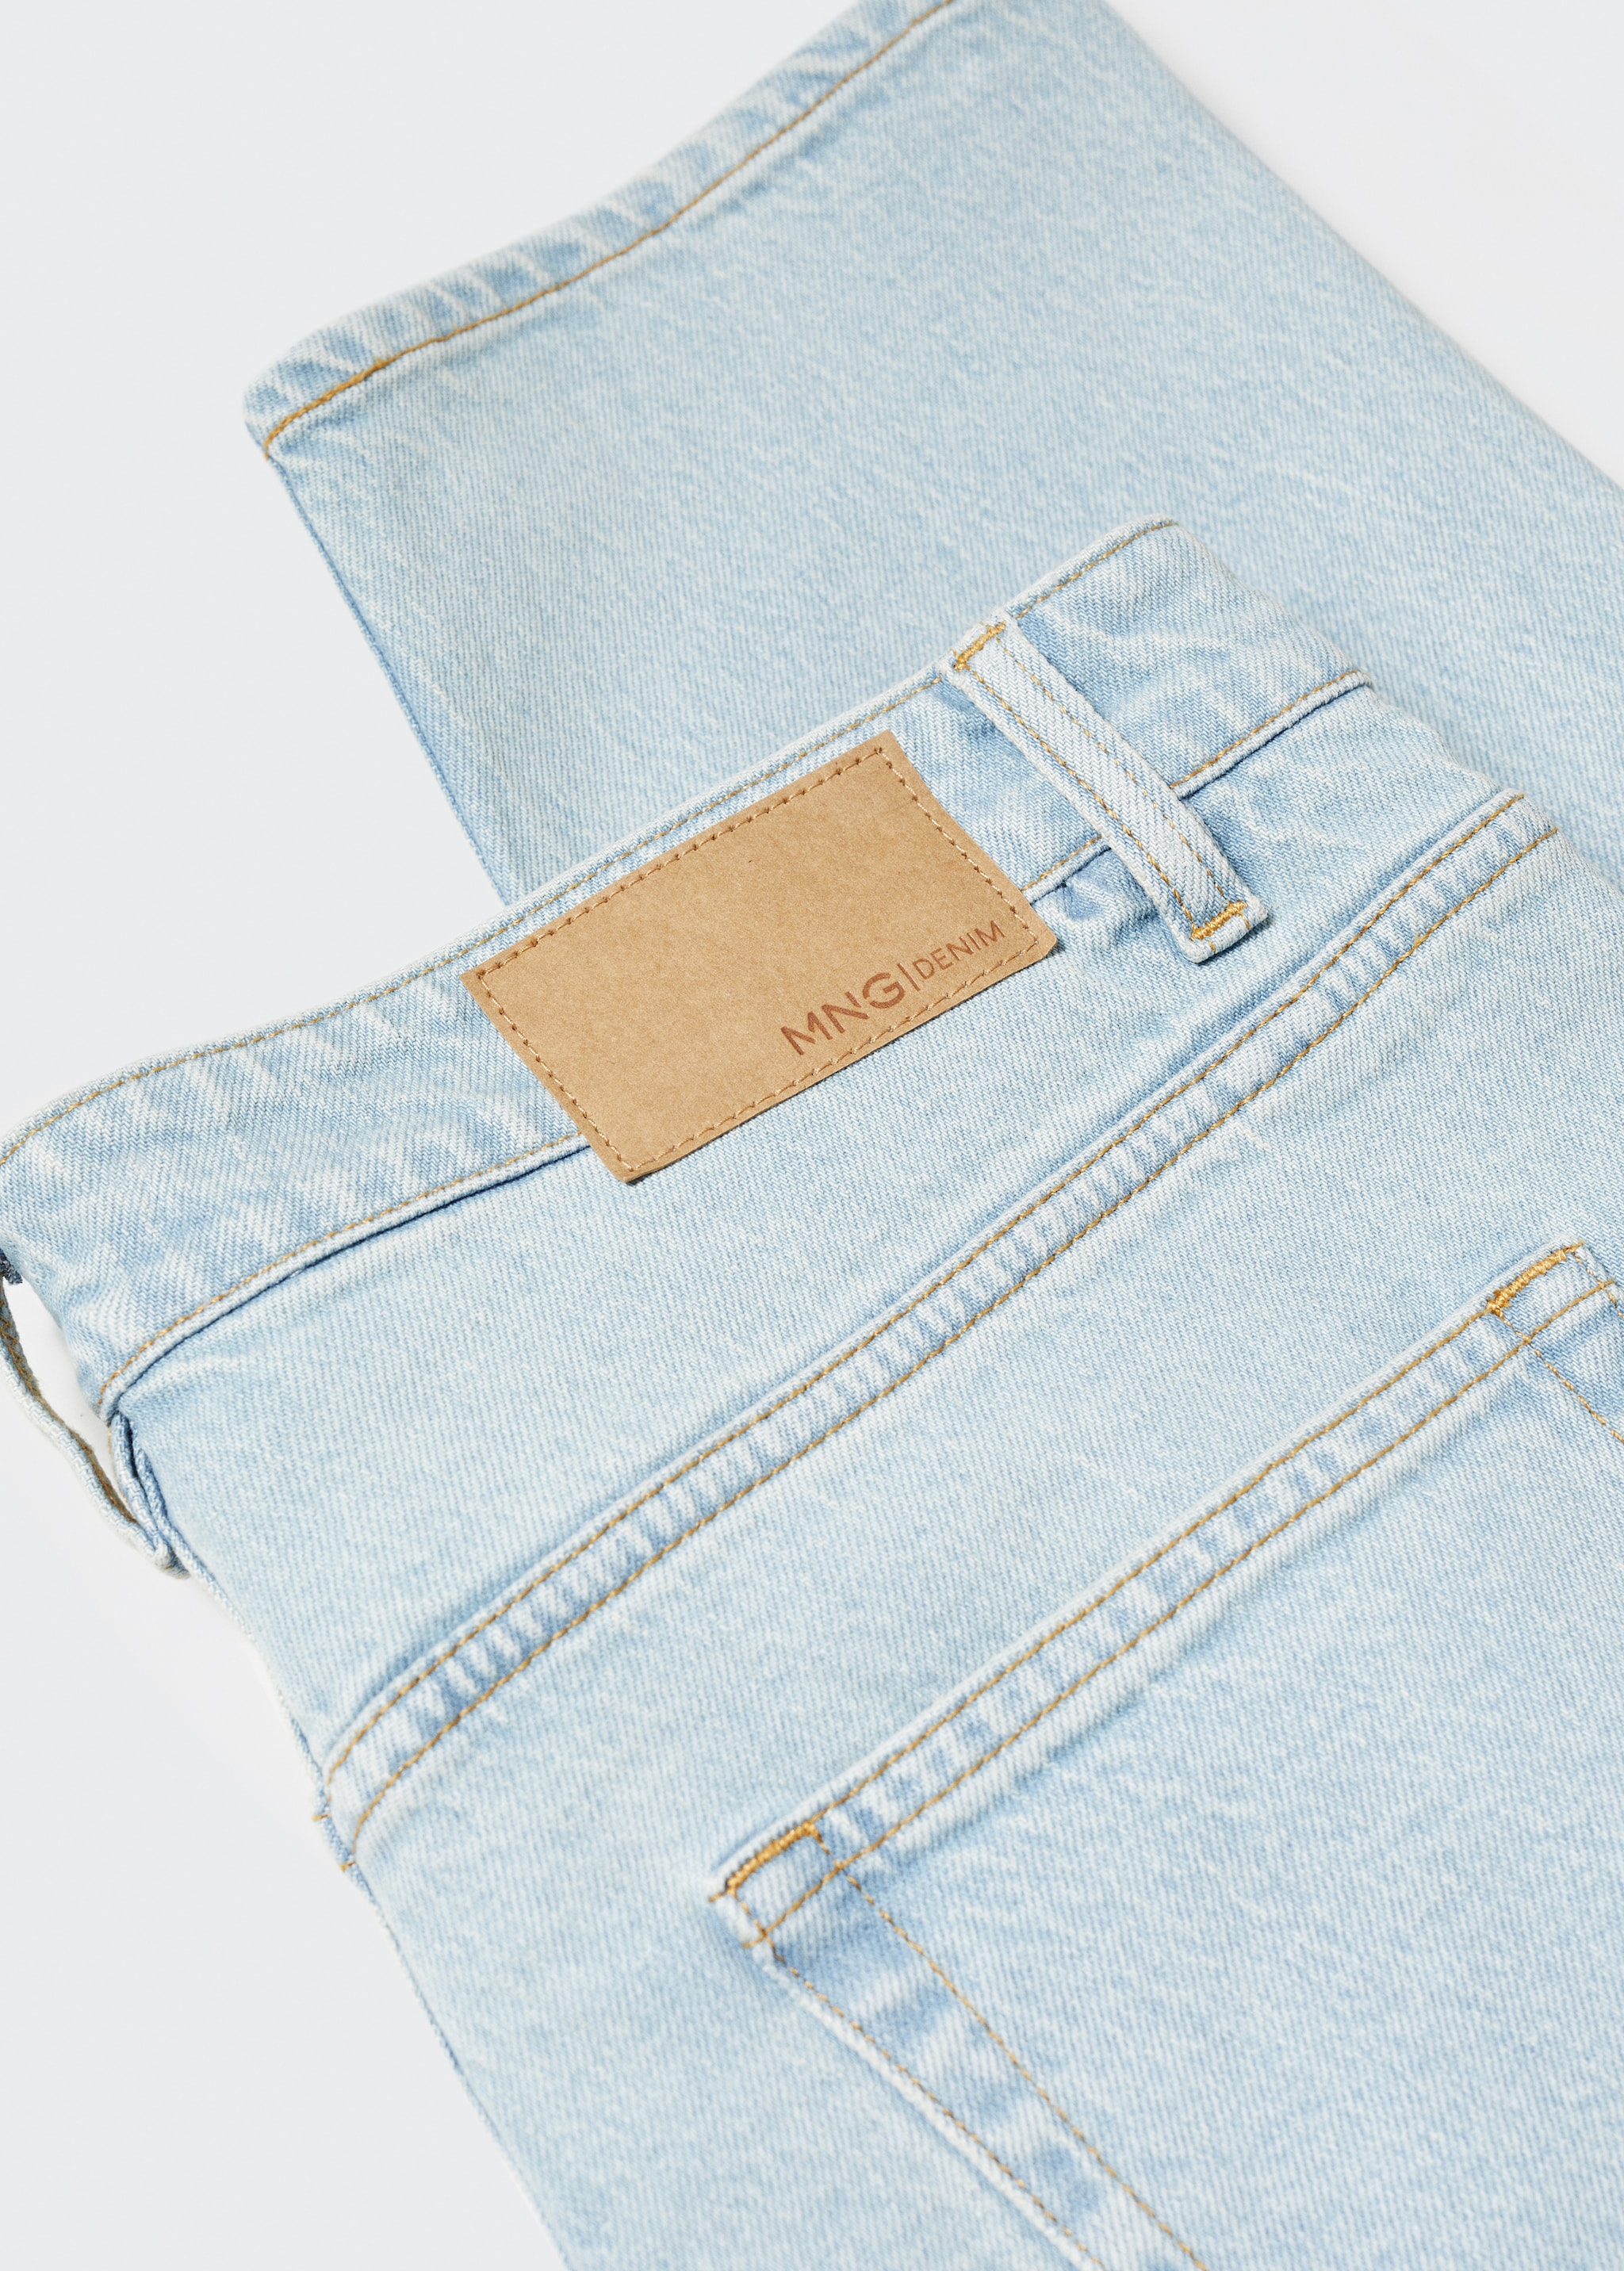 Jean Ben tapered cropped - Details of the article 8